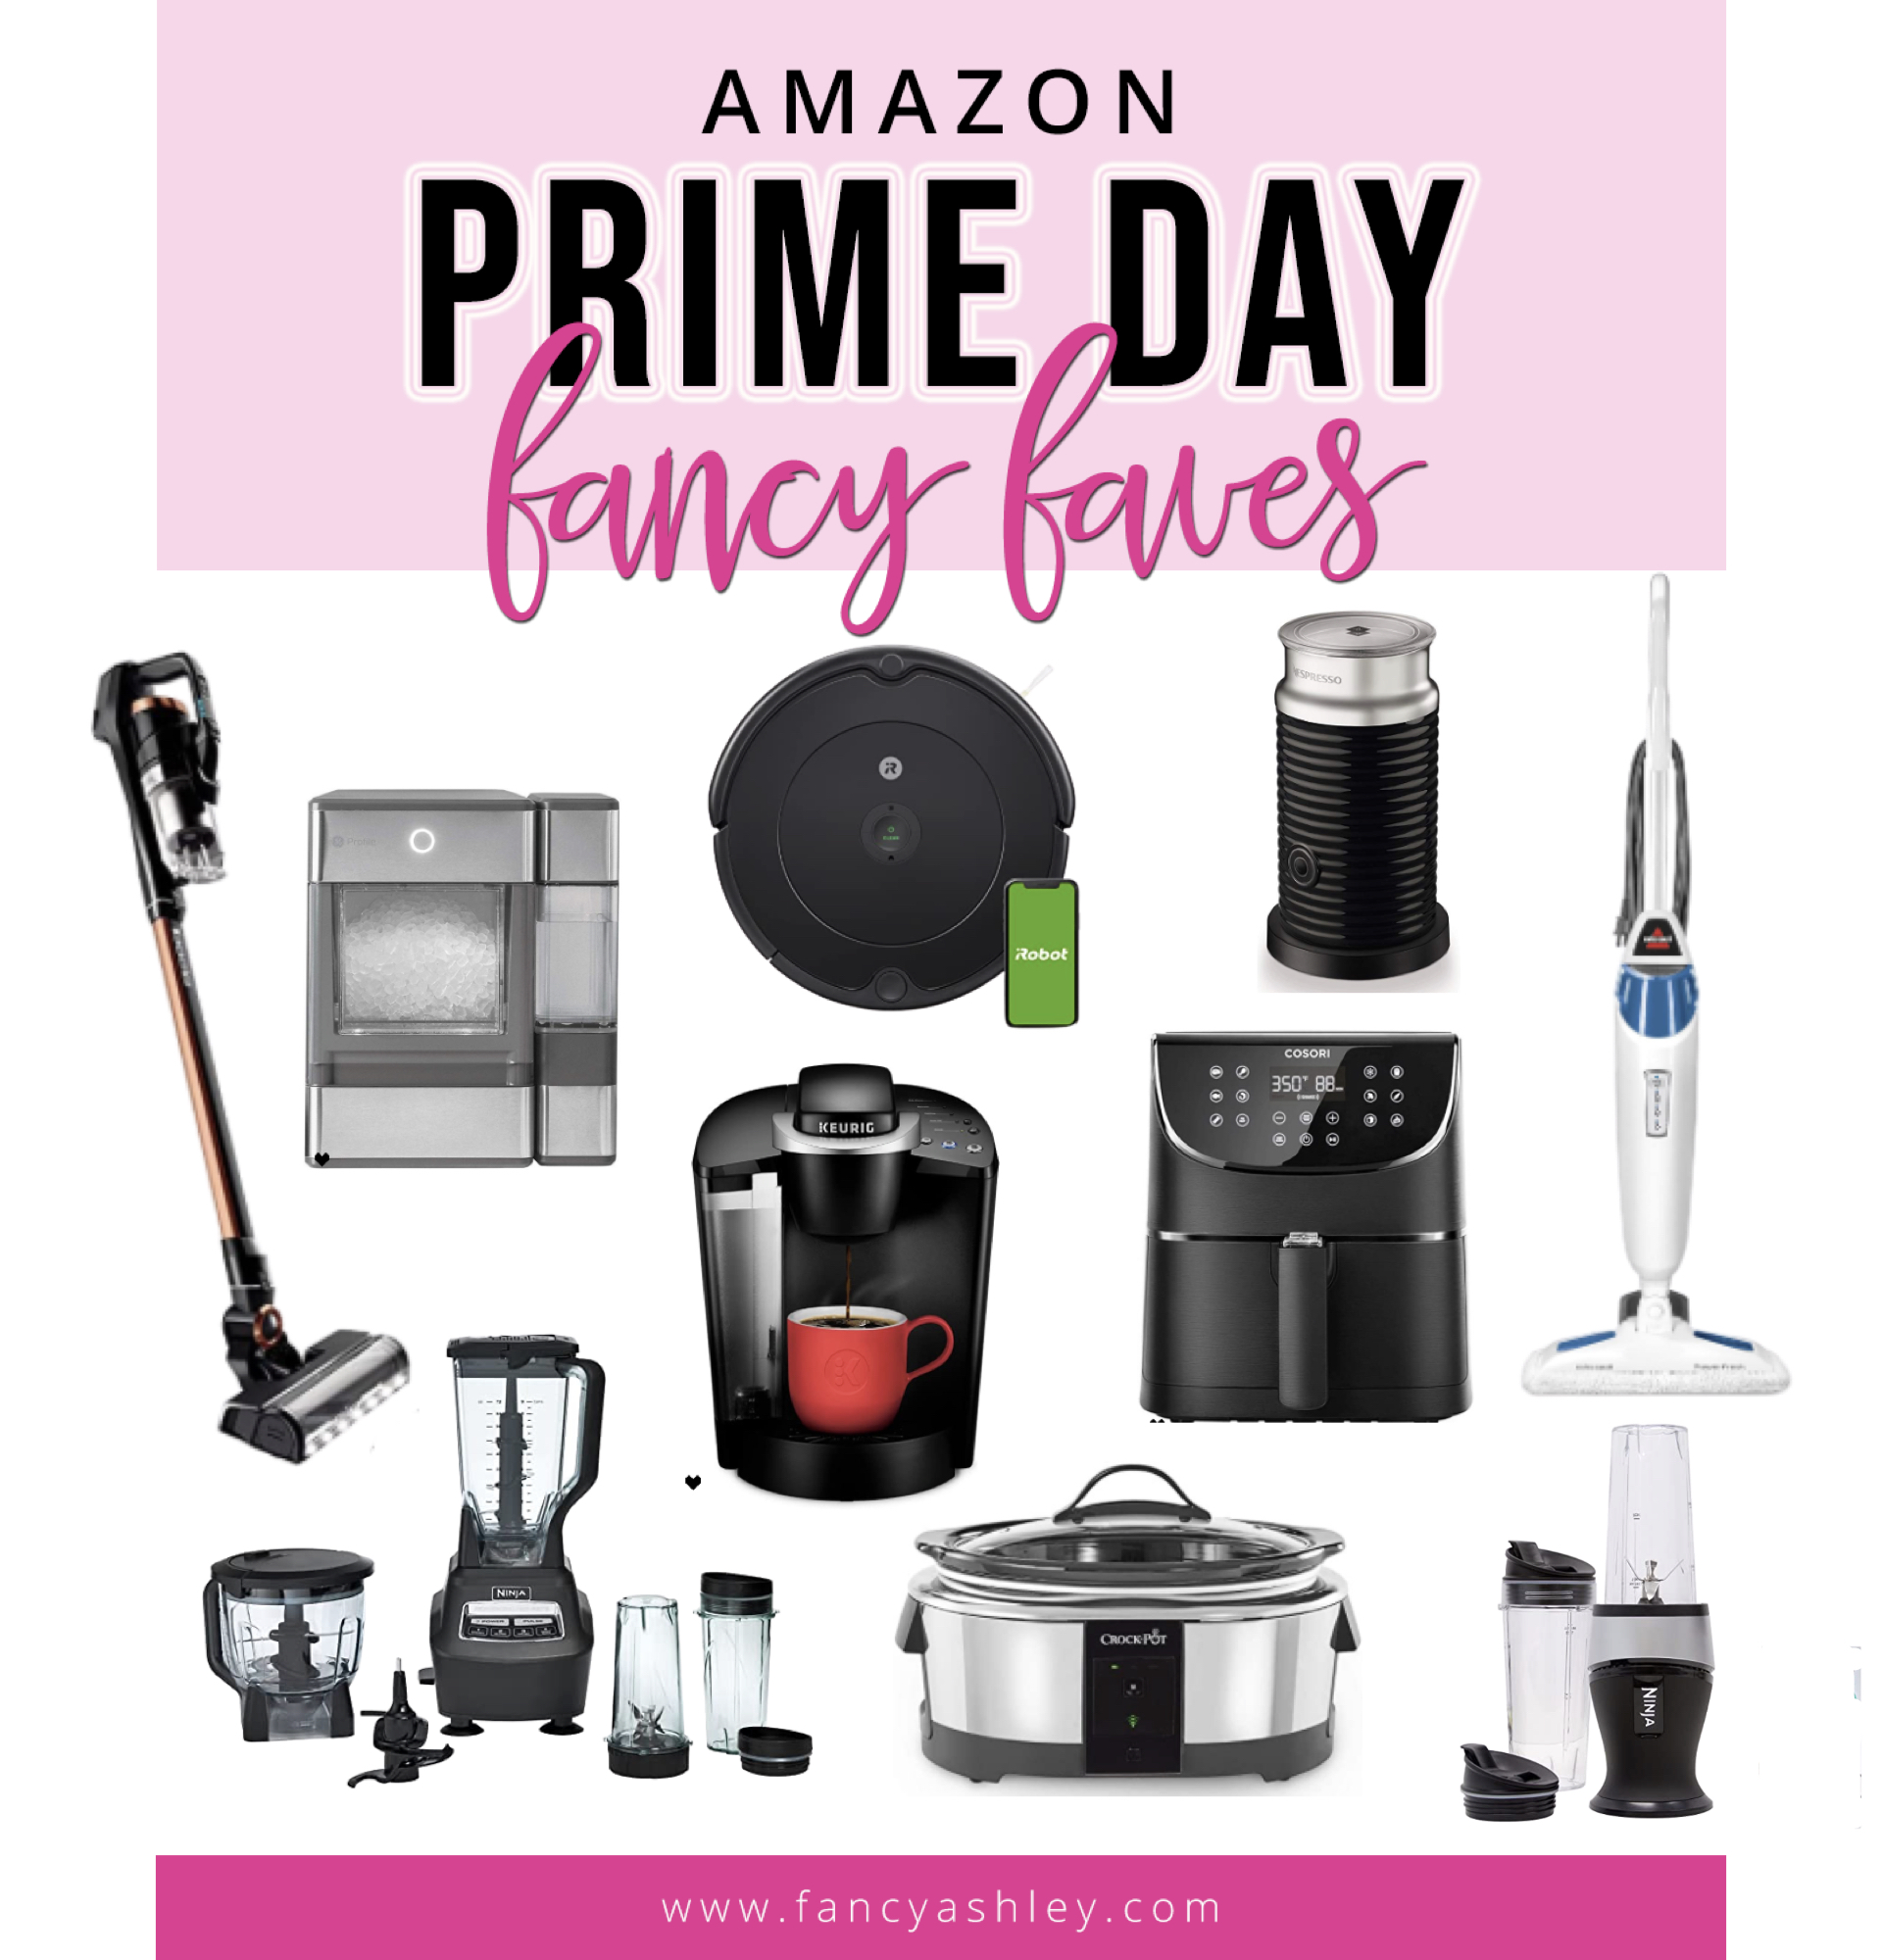 Prime Day by popular Houston life and style blog, Fancy Ashley: collage image of a Vacuum, Ice Maker, iRobot, Nespresso Frother, team Mop, Keurig, Air Fryer, Ninja Blender, Slow Cooker, and Ninja Single Blender.